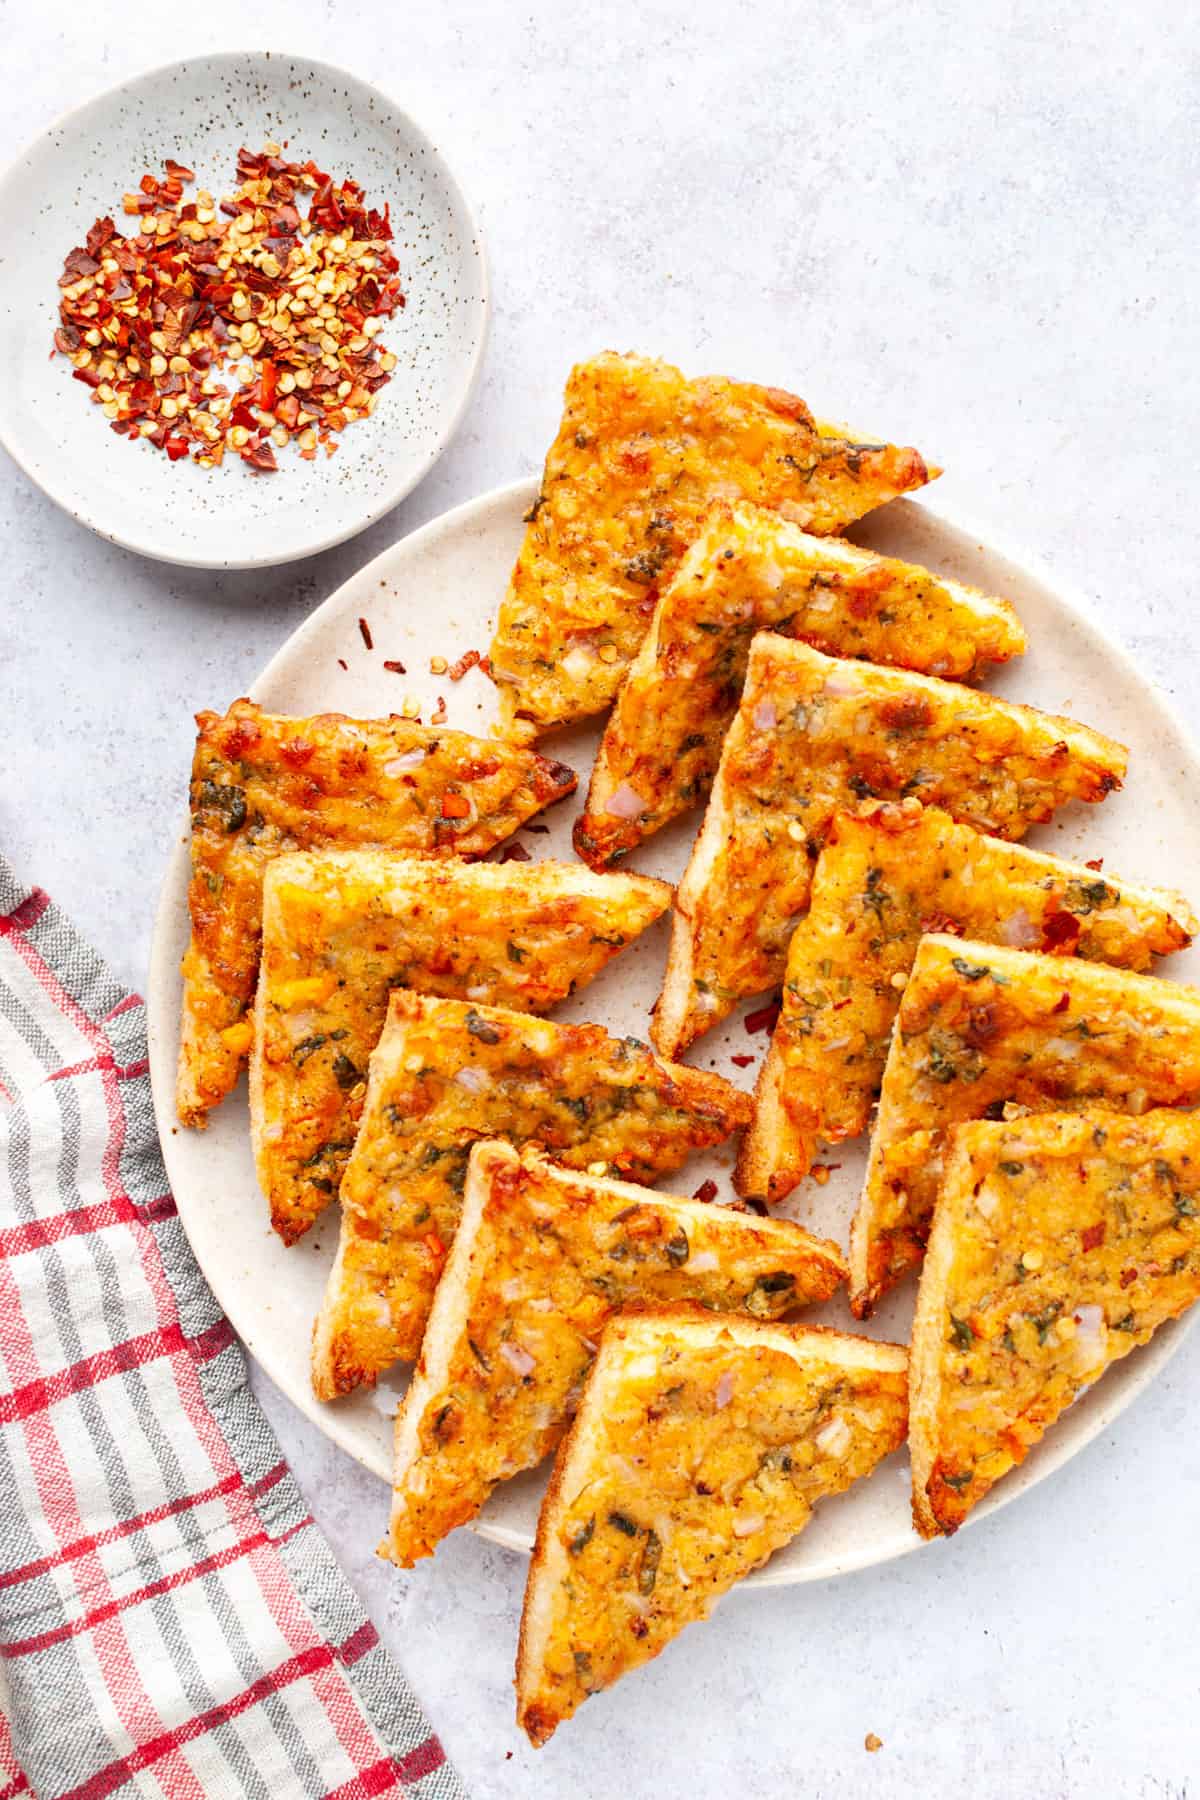 Chilli cheese toast triangles on a platter with chilli flakes on top left.